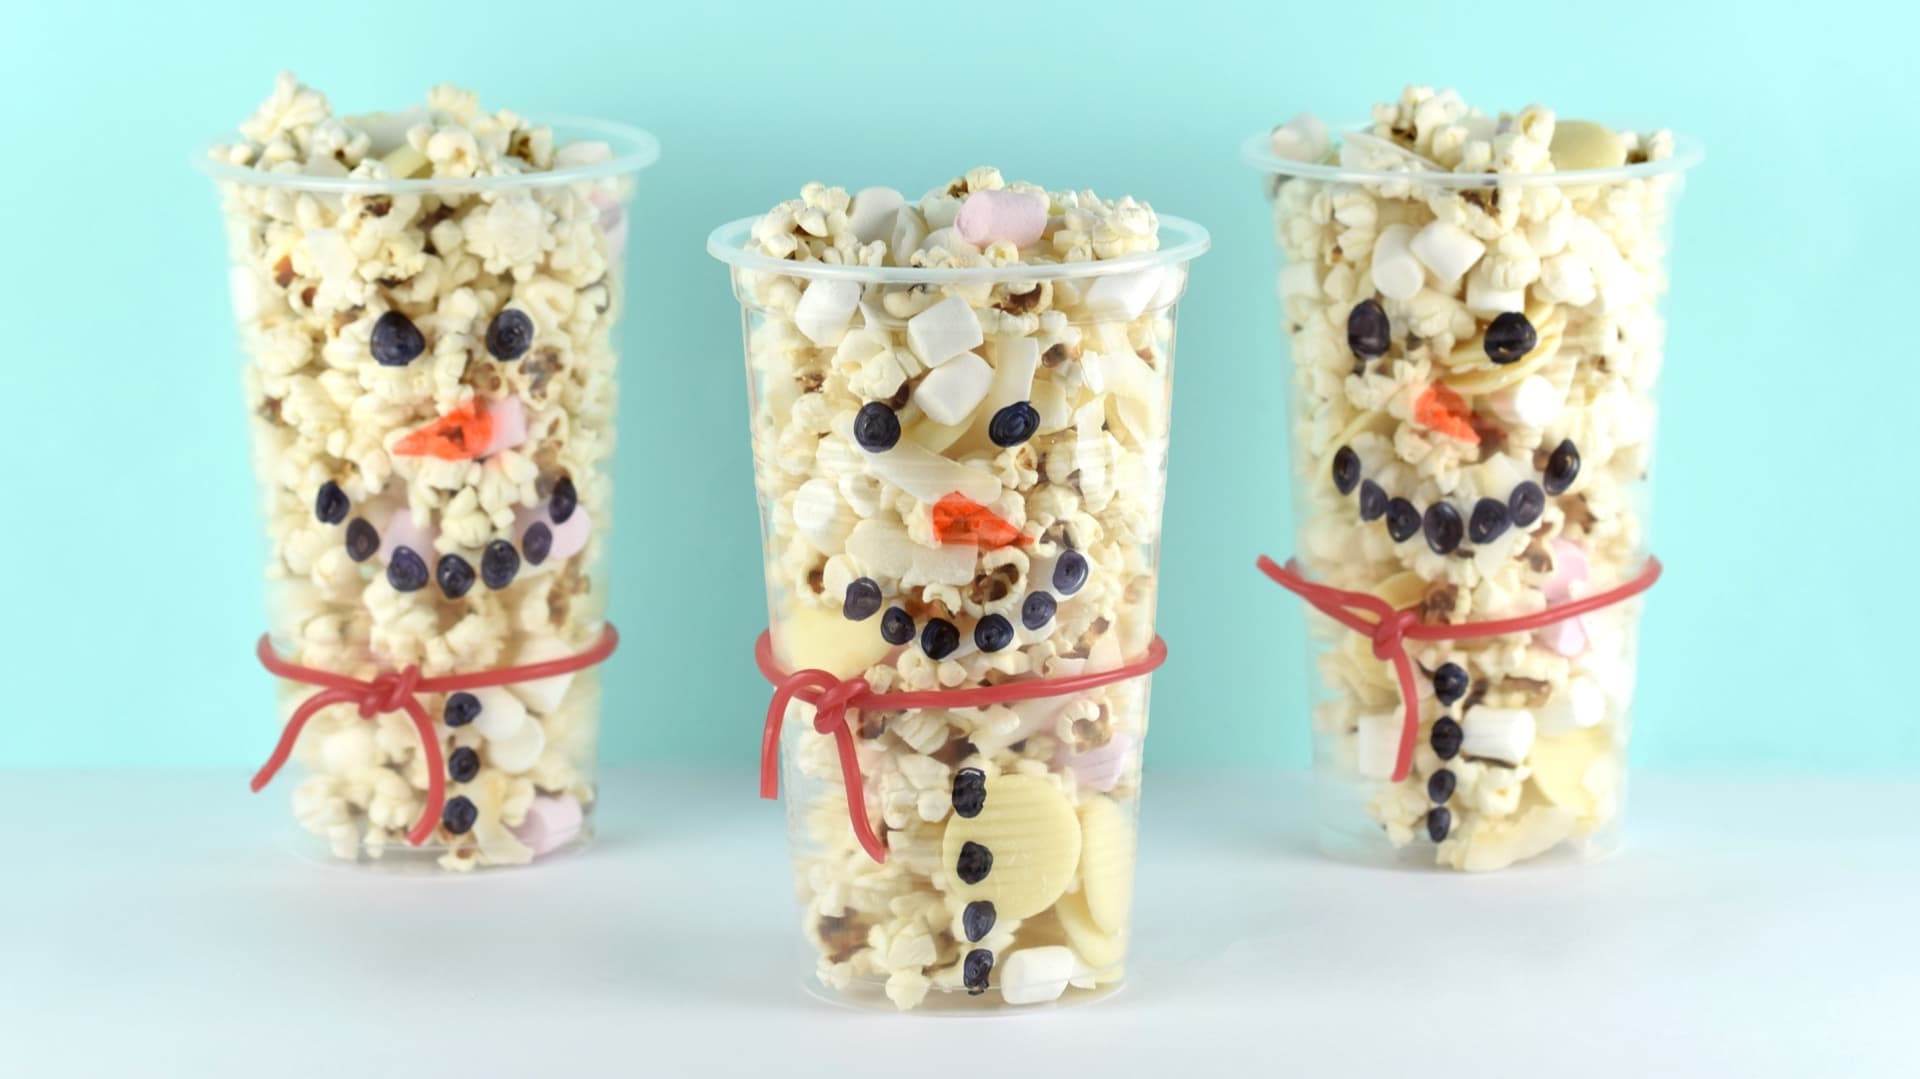 Party Snack Cup Ideas